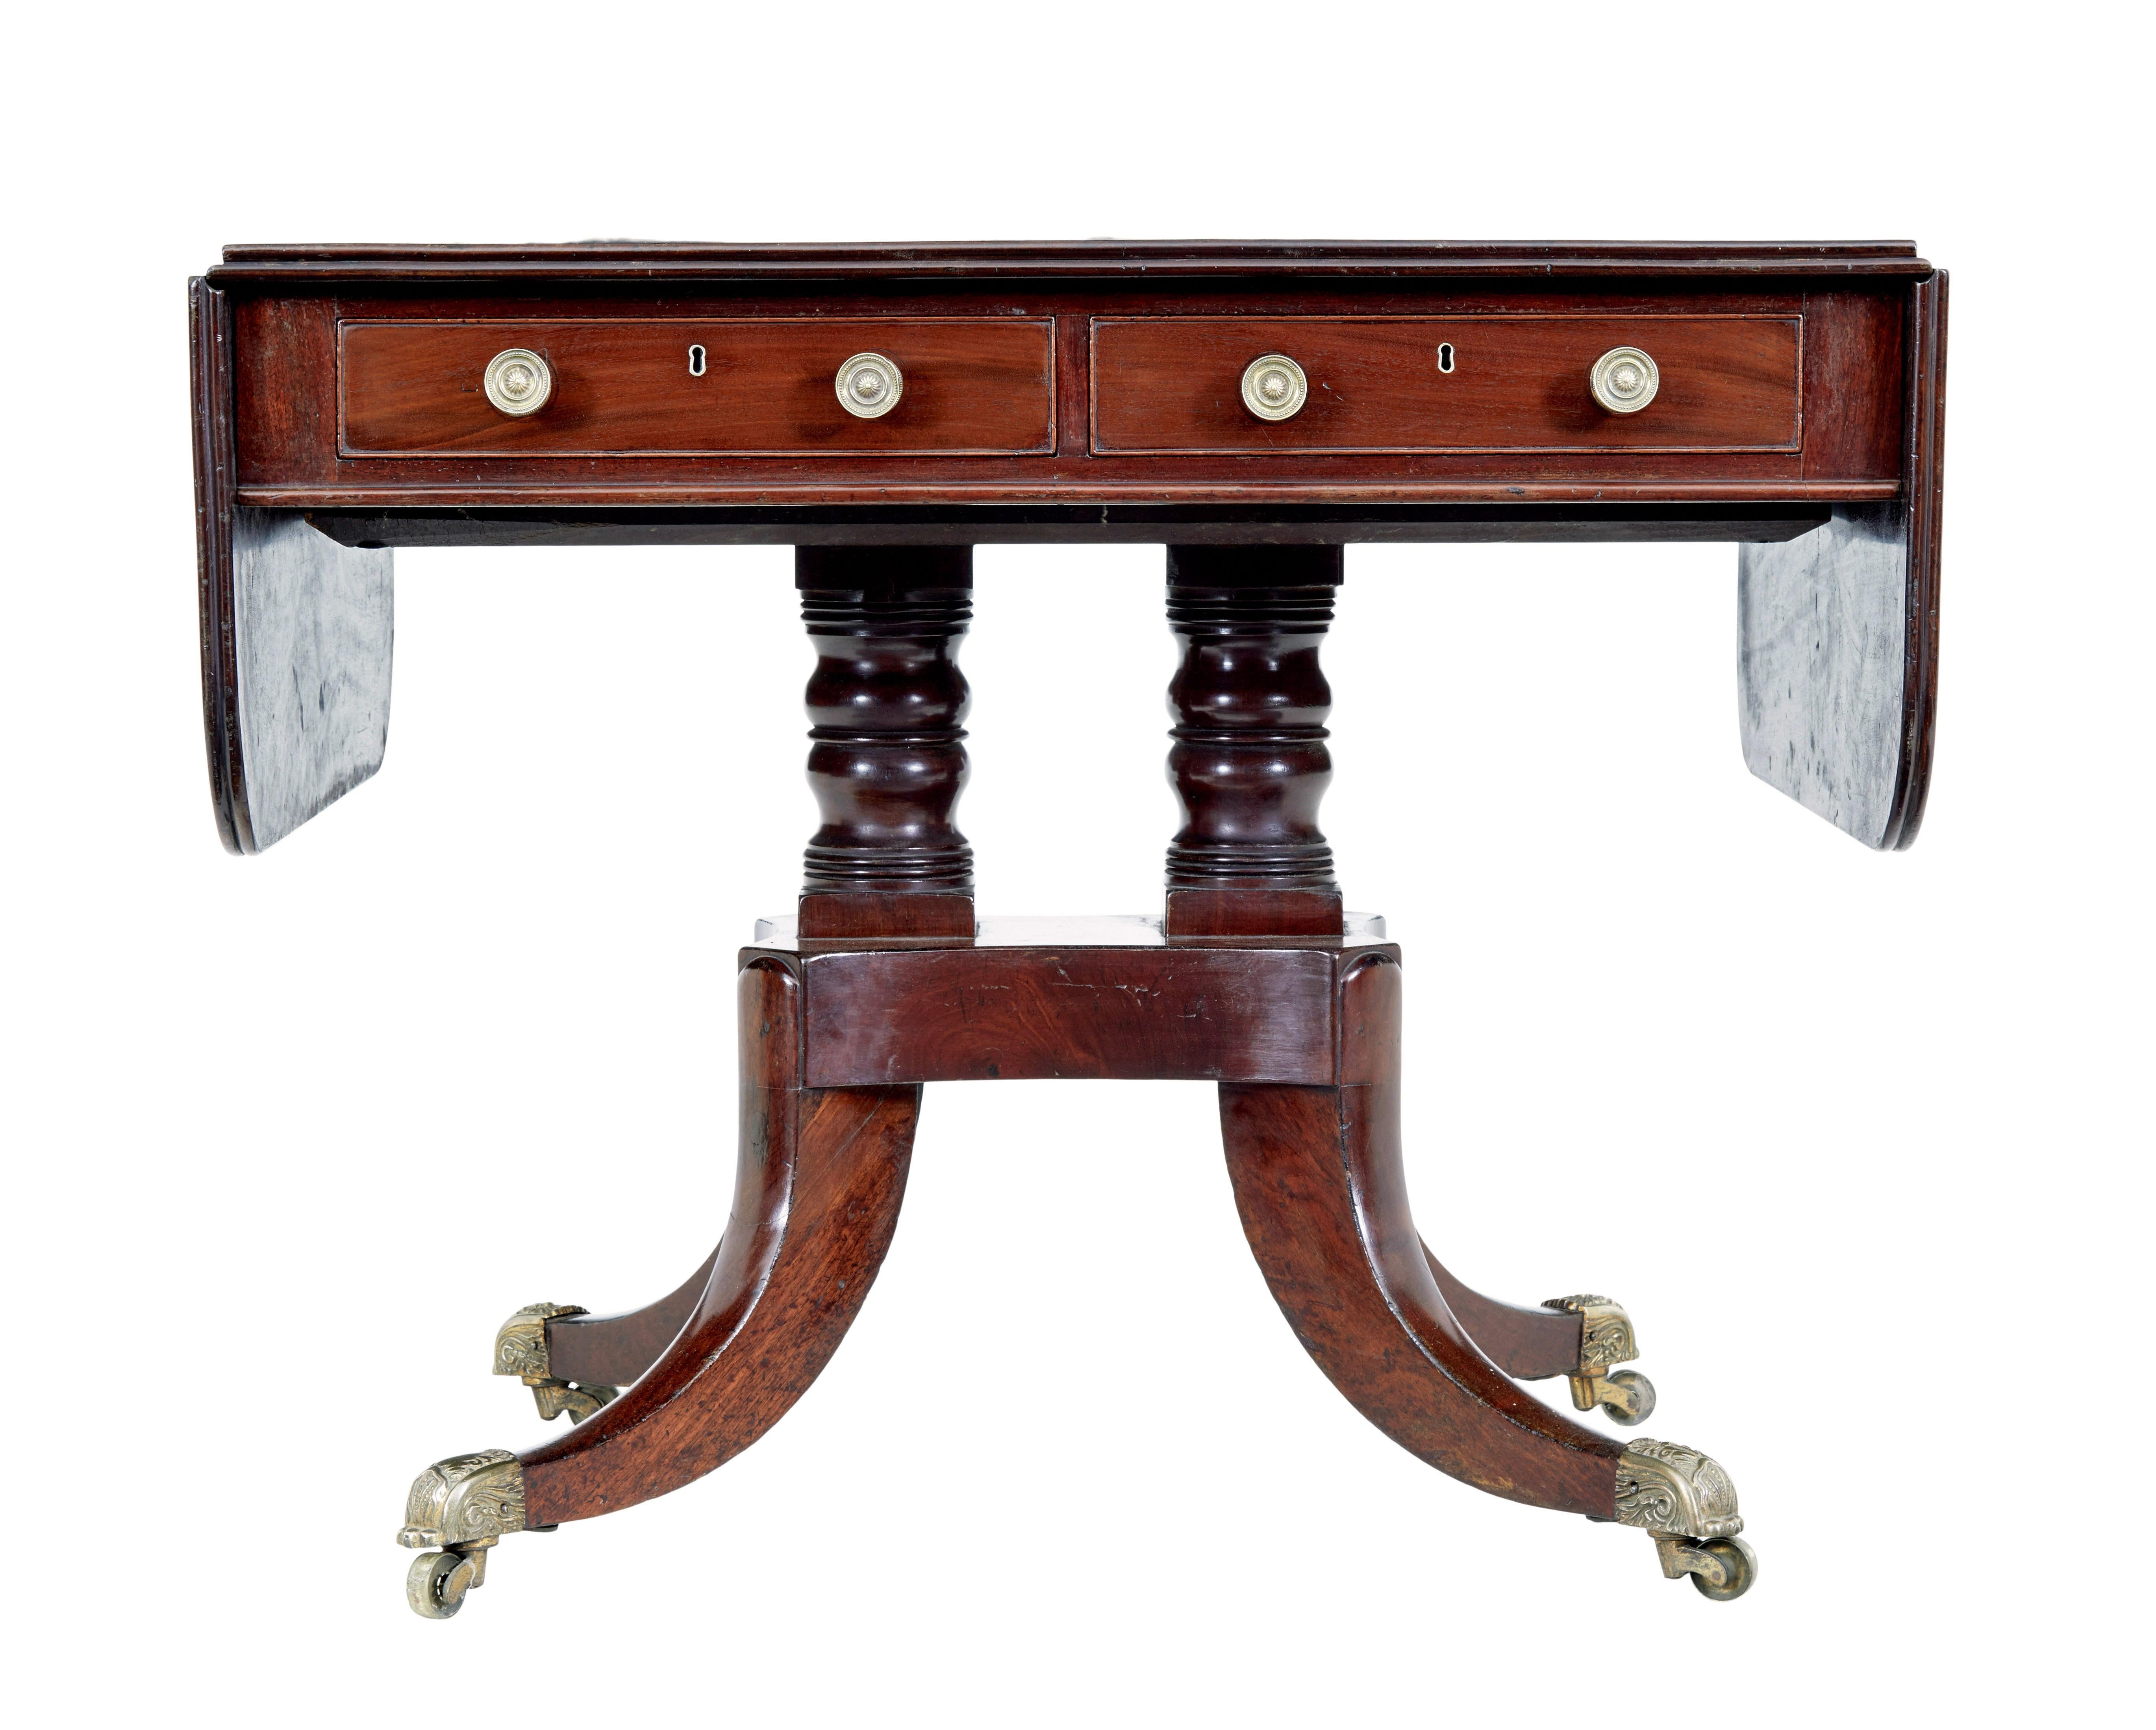 19th century early Victorian mahogany sofa table circa 1840.

Excellent quality solid mahogany sofa table, from the late William IV/early Victorian period.

Freestanding with dummy drawers on the reverse to mirror the front. 2 deep drawers.